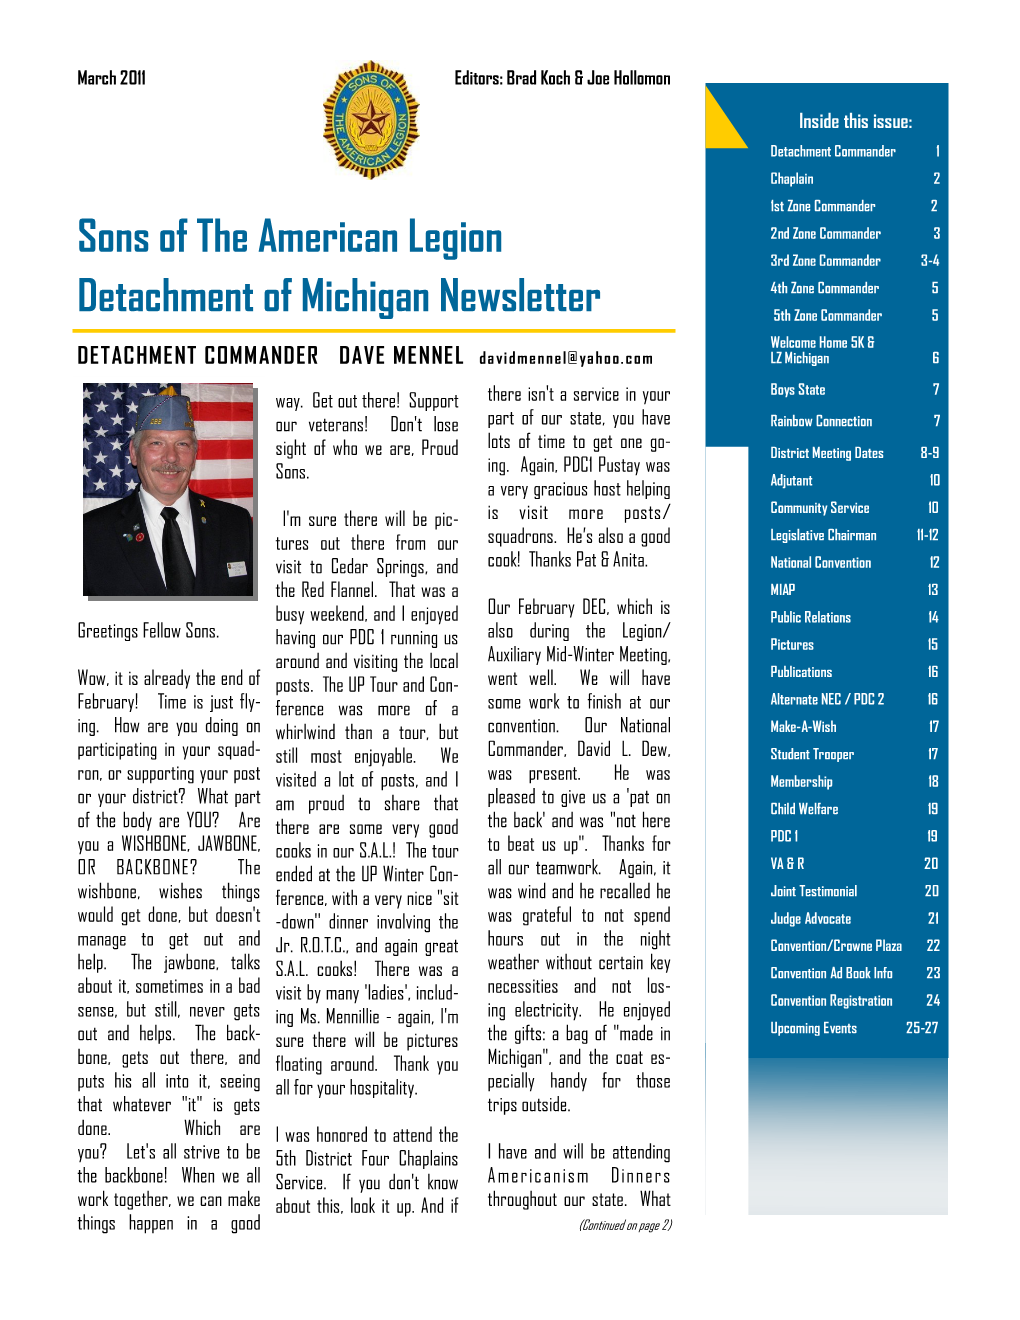 Sons of the American Legion Detachment of Michigan Newsletter